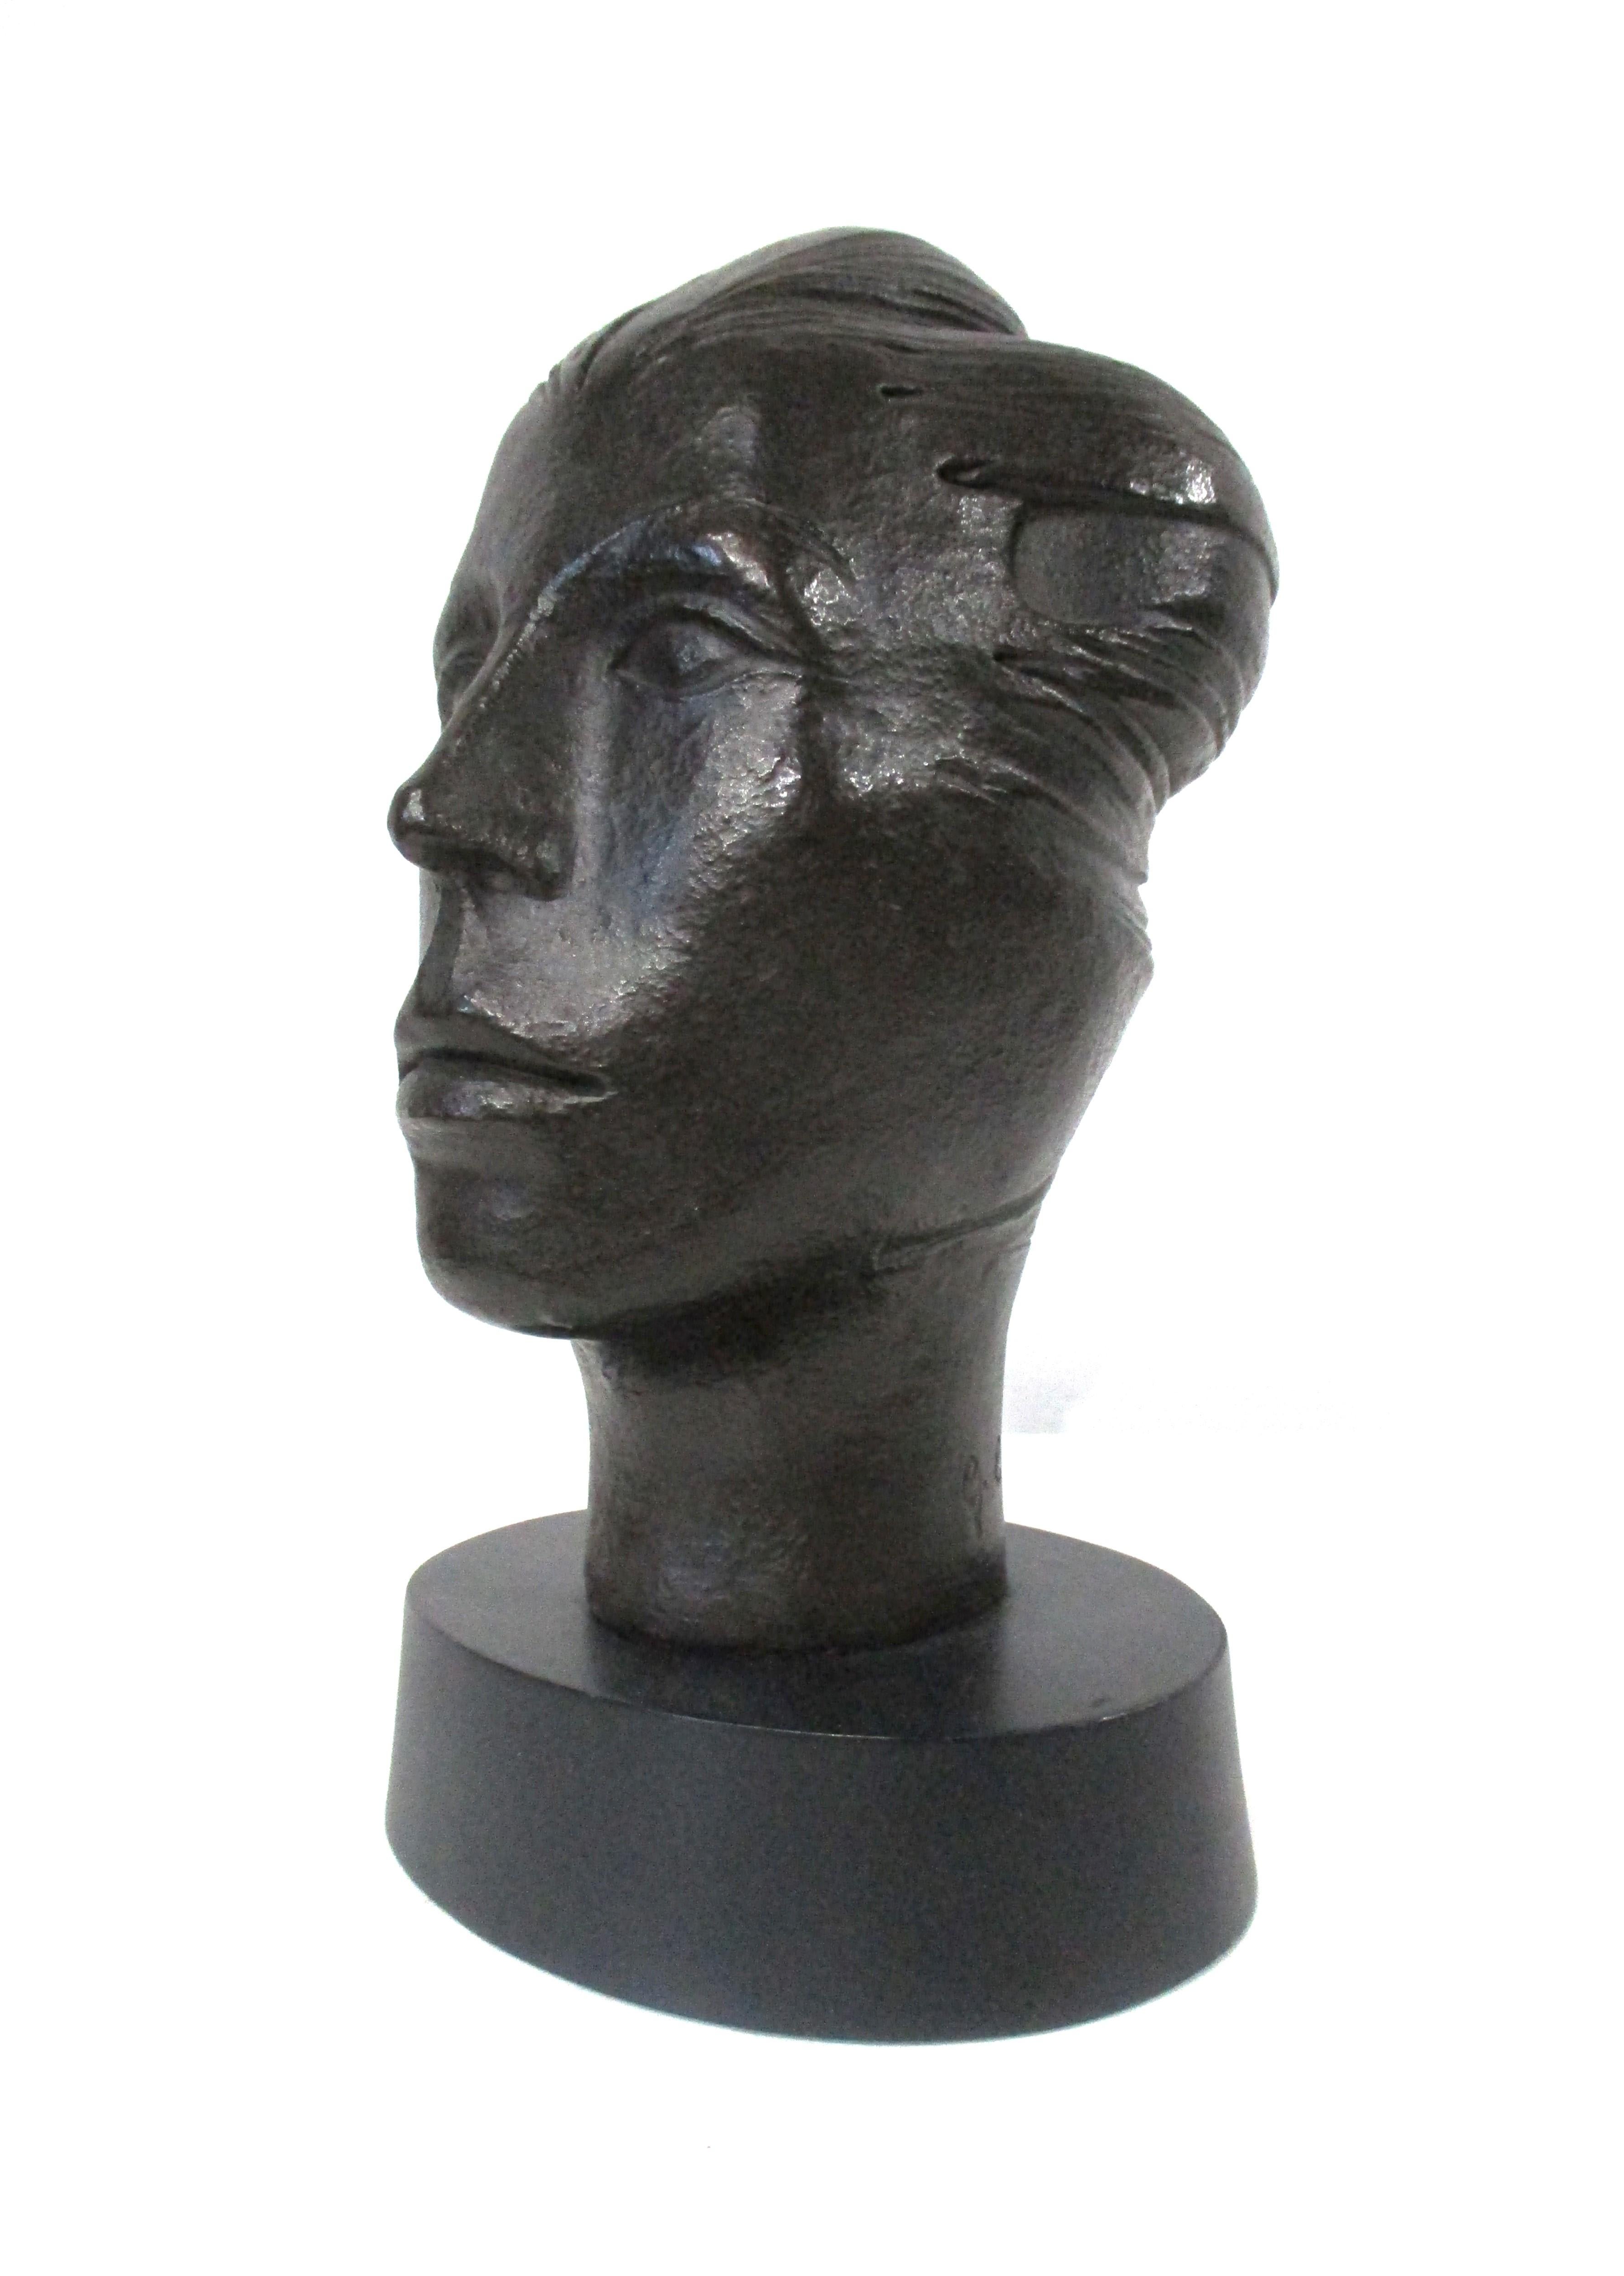 A sculpture of a strong woman's head in a dark bronze styled finish with satin black oval base . This cast composite bust has great details with a wind swept feel of freedom and confidence signed and numbered by the artist to the back of the neck